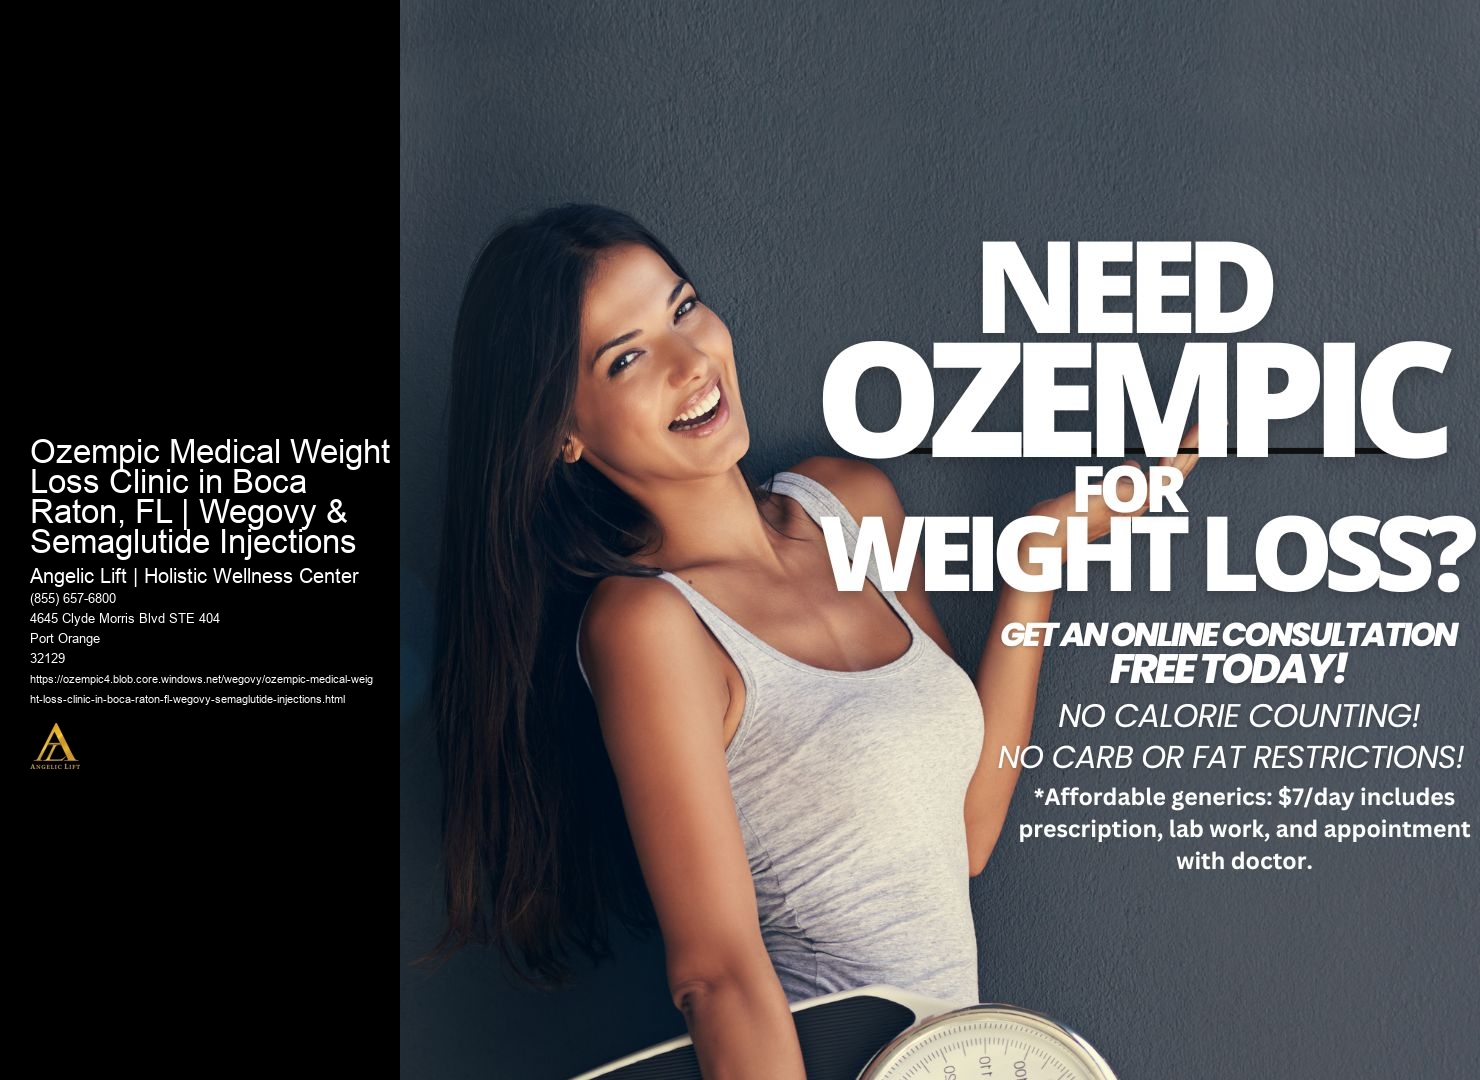 Ozempic Medical Weight Loss Clinic in Boca Raton, FL | Wegovy & Semaglutide Injections